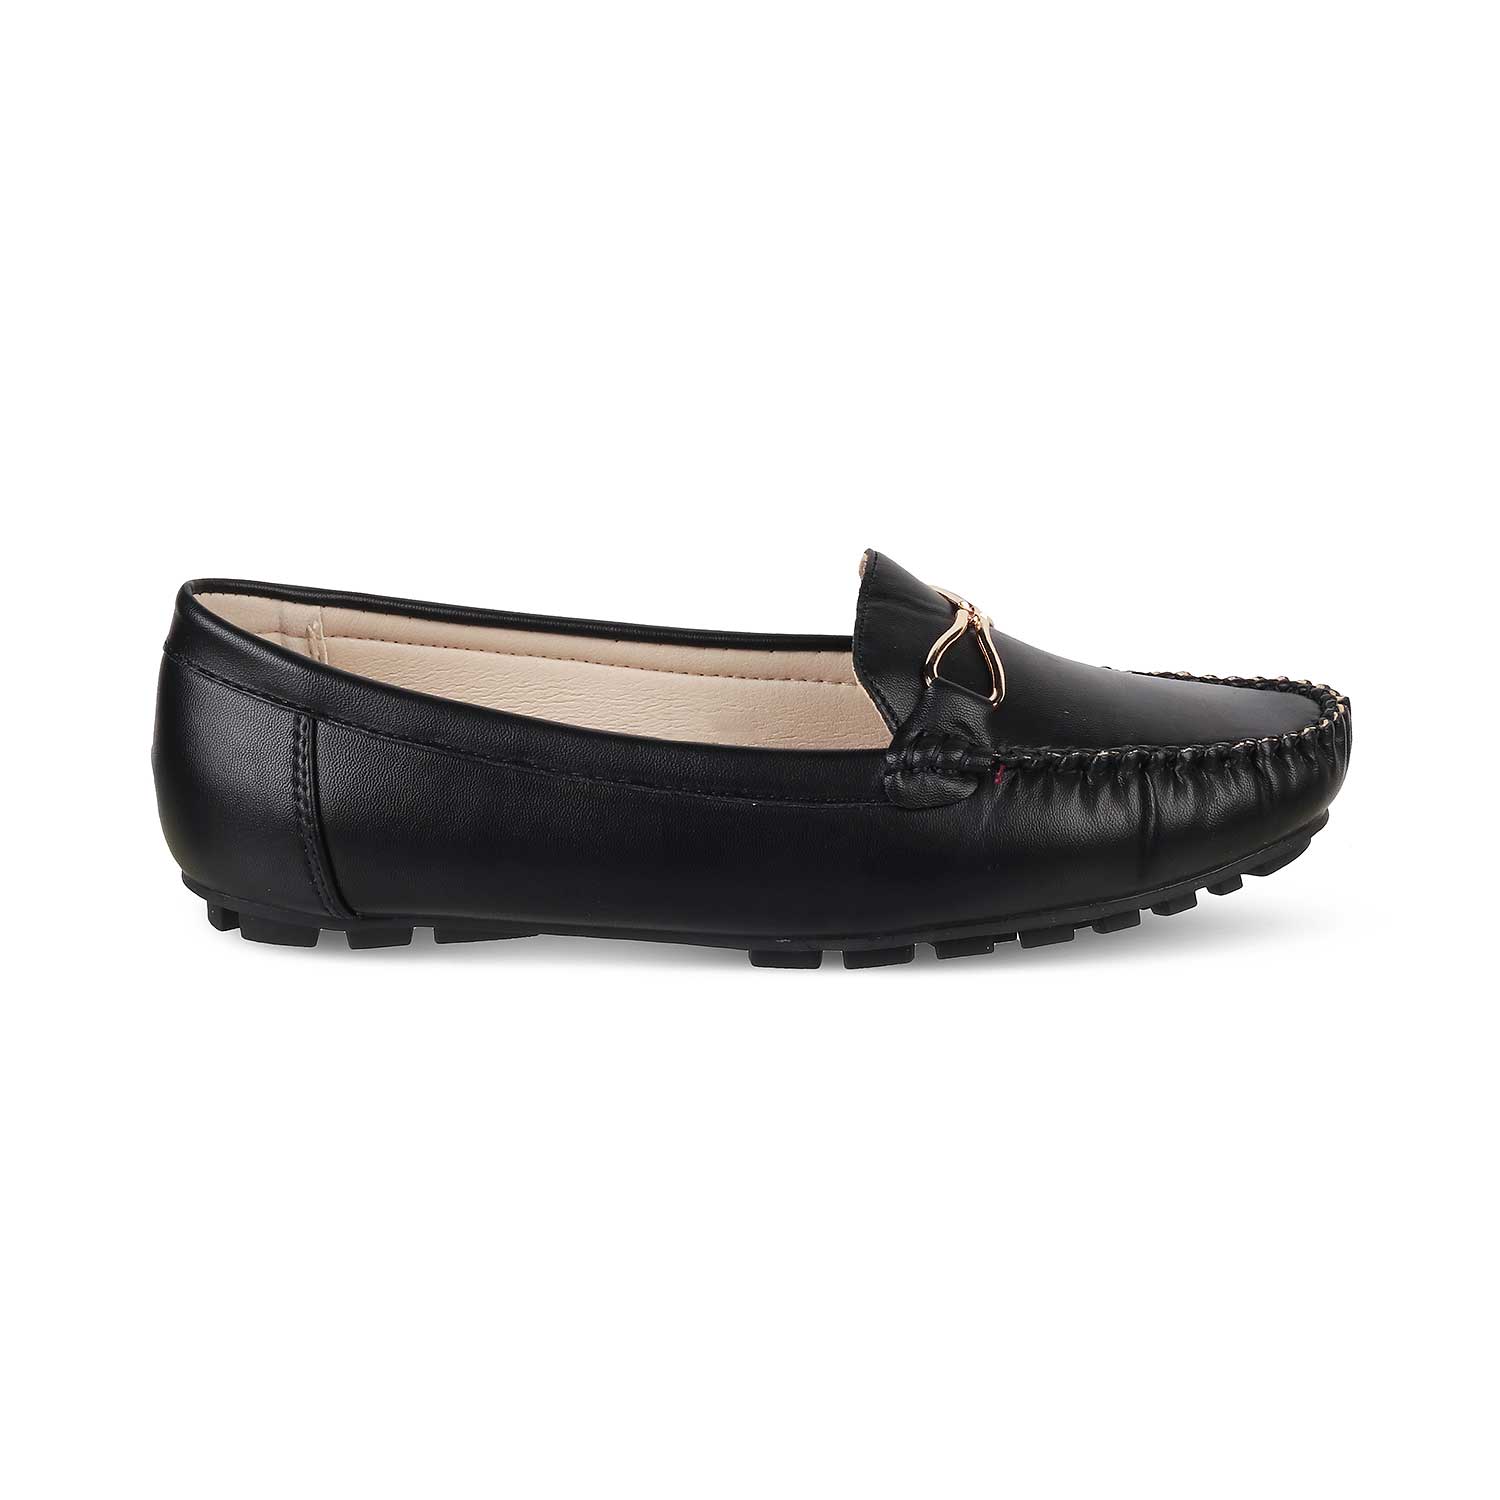 Tresmode-The Carpi Black Women's Casual Loafers Tresmode-Tresmode